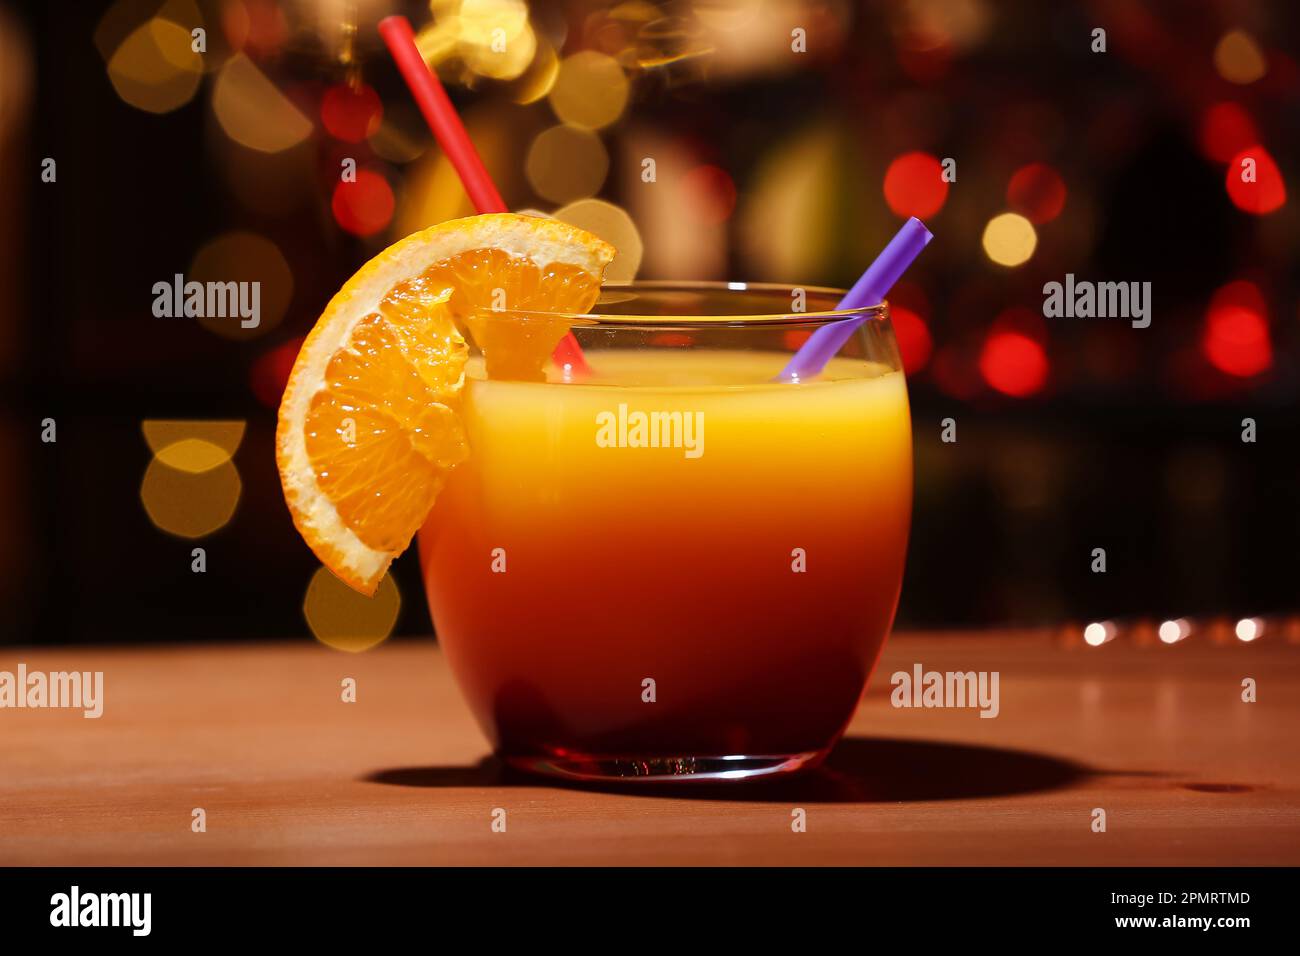 Glass of tasty Tequila Sunrise with orange slice on table against blurred lights Stock Photo